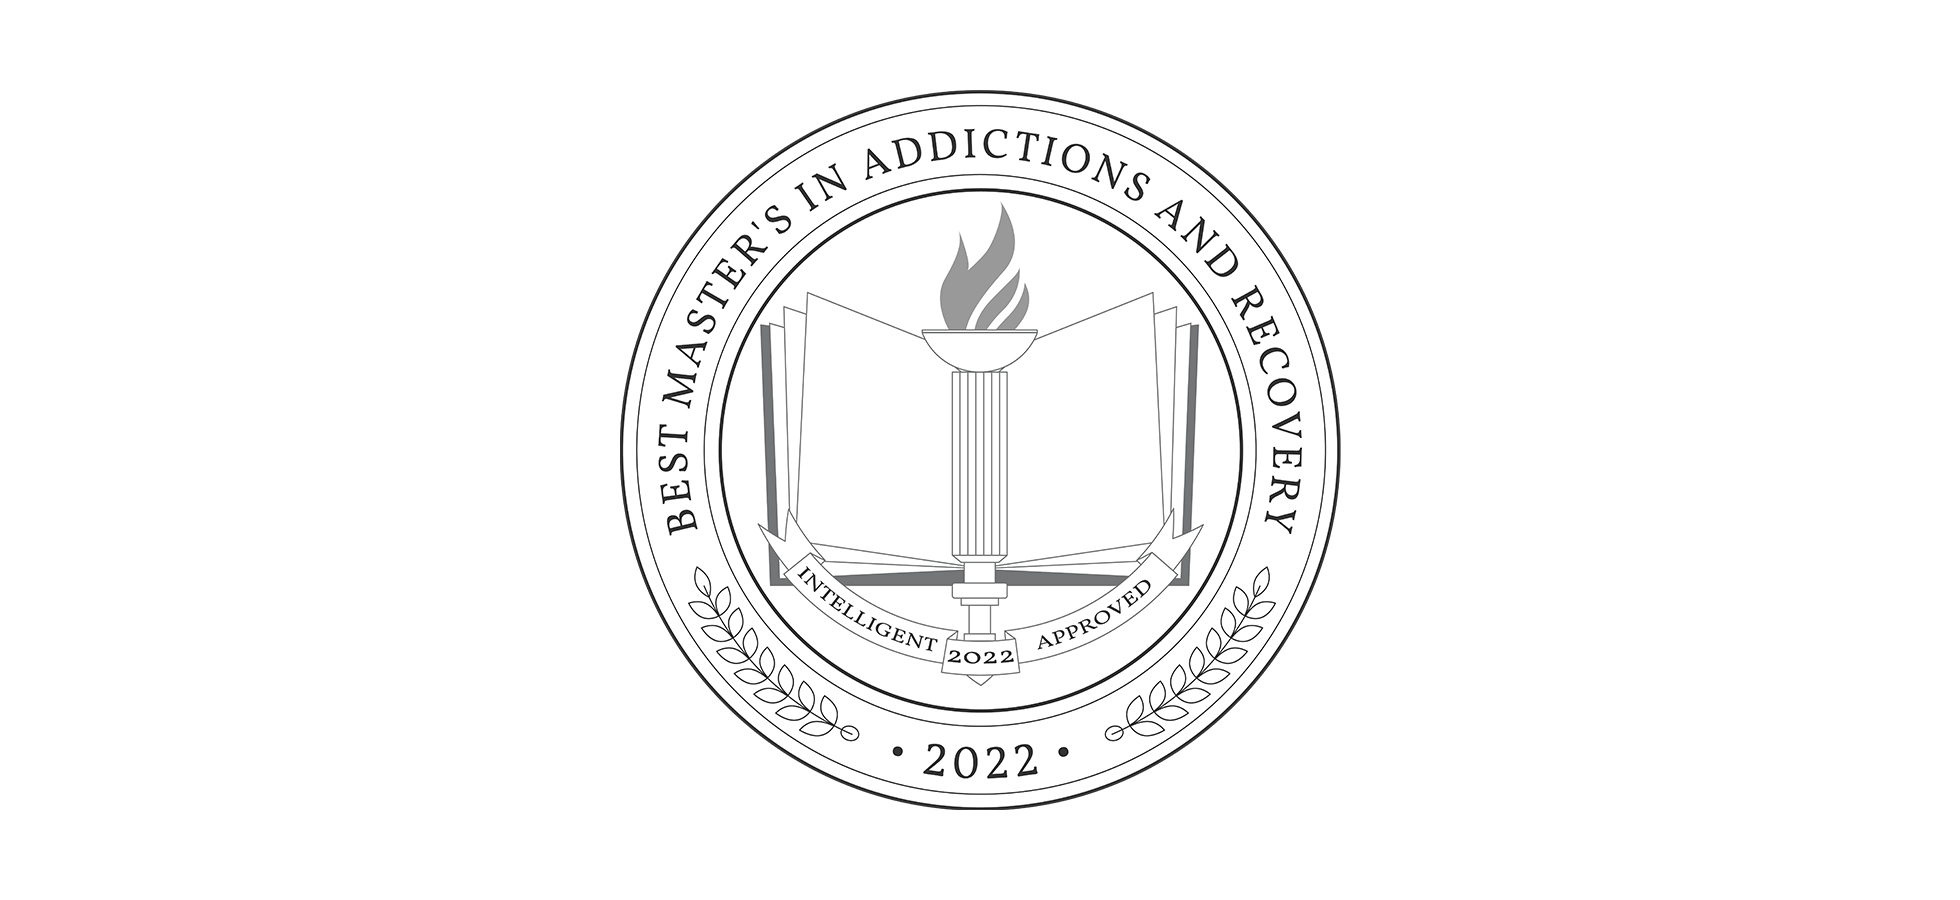 A badge indicating that Assumption University’s Master’s in Rehabilitation Counseling degree program has been ranked number one in the nation by Intelligent in its Top 19 Master’s in Addictions and Recovery Degree Programs rankings